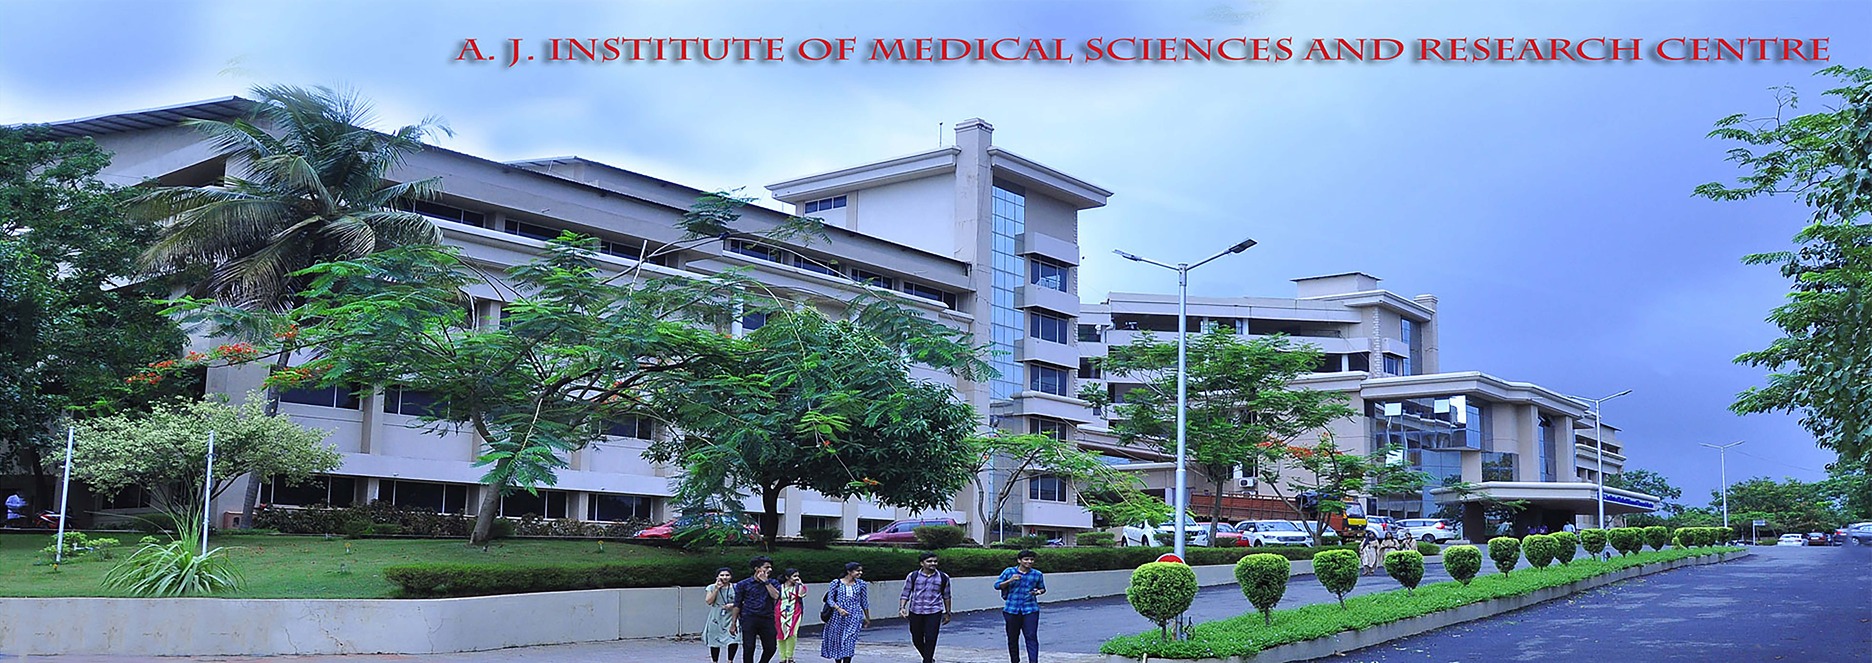 AJ Institute of Medical Sciences and Research Centre (AJIMS)